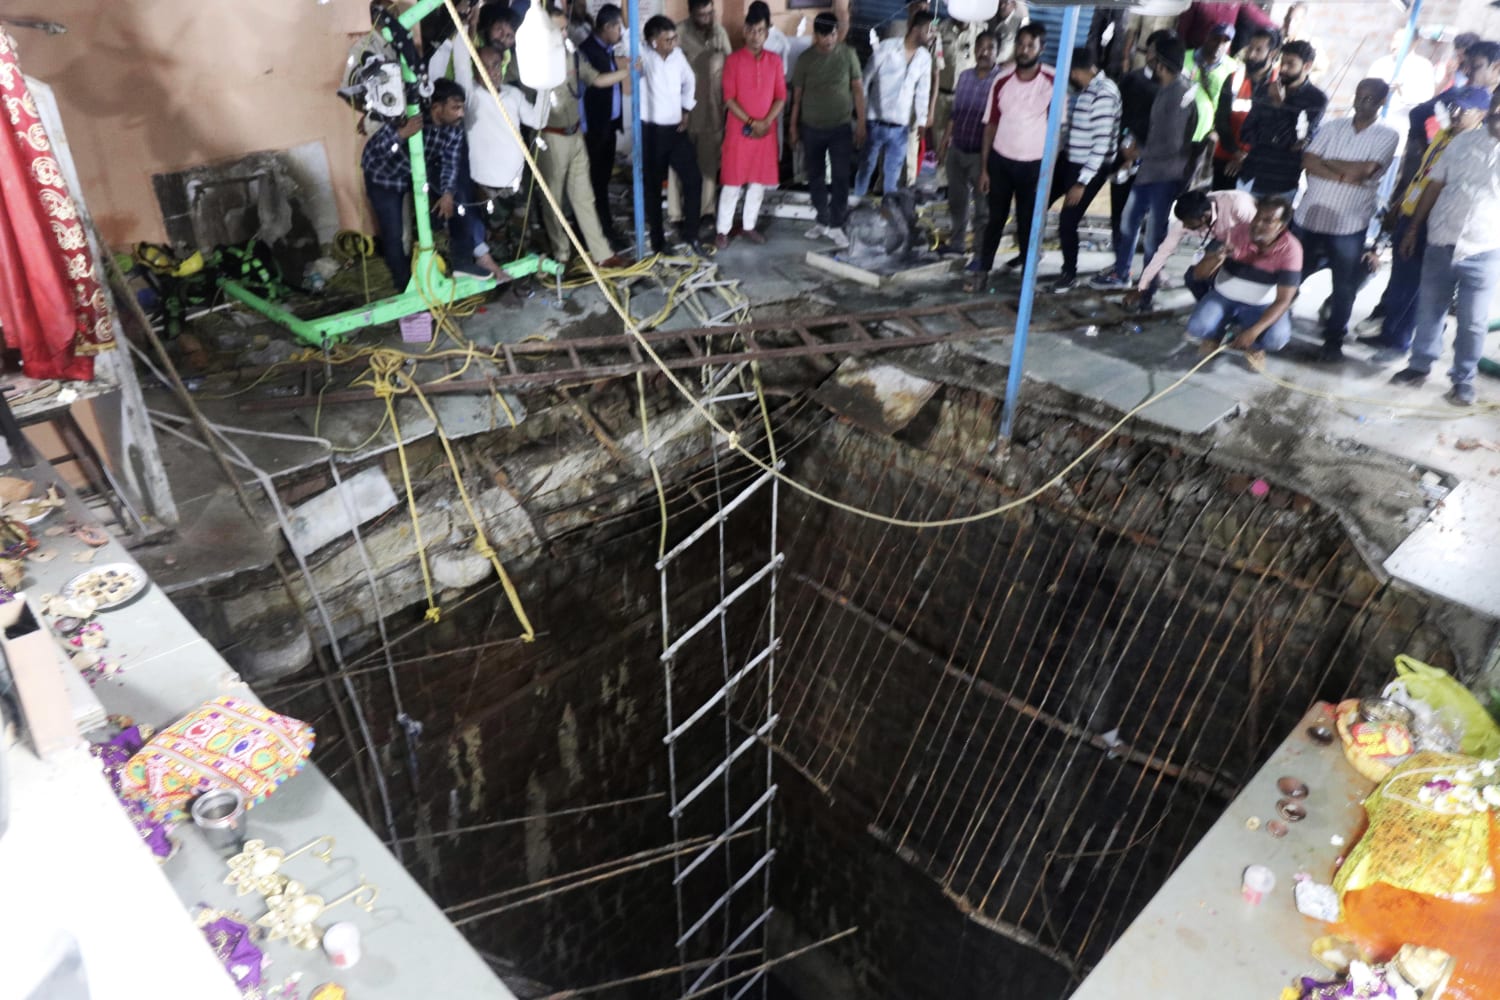 35 bodies found inside well after collapse at Indian temple